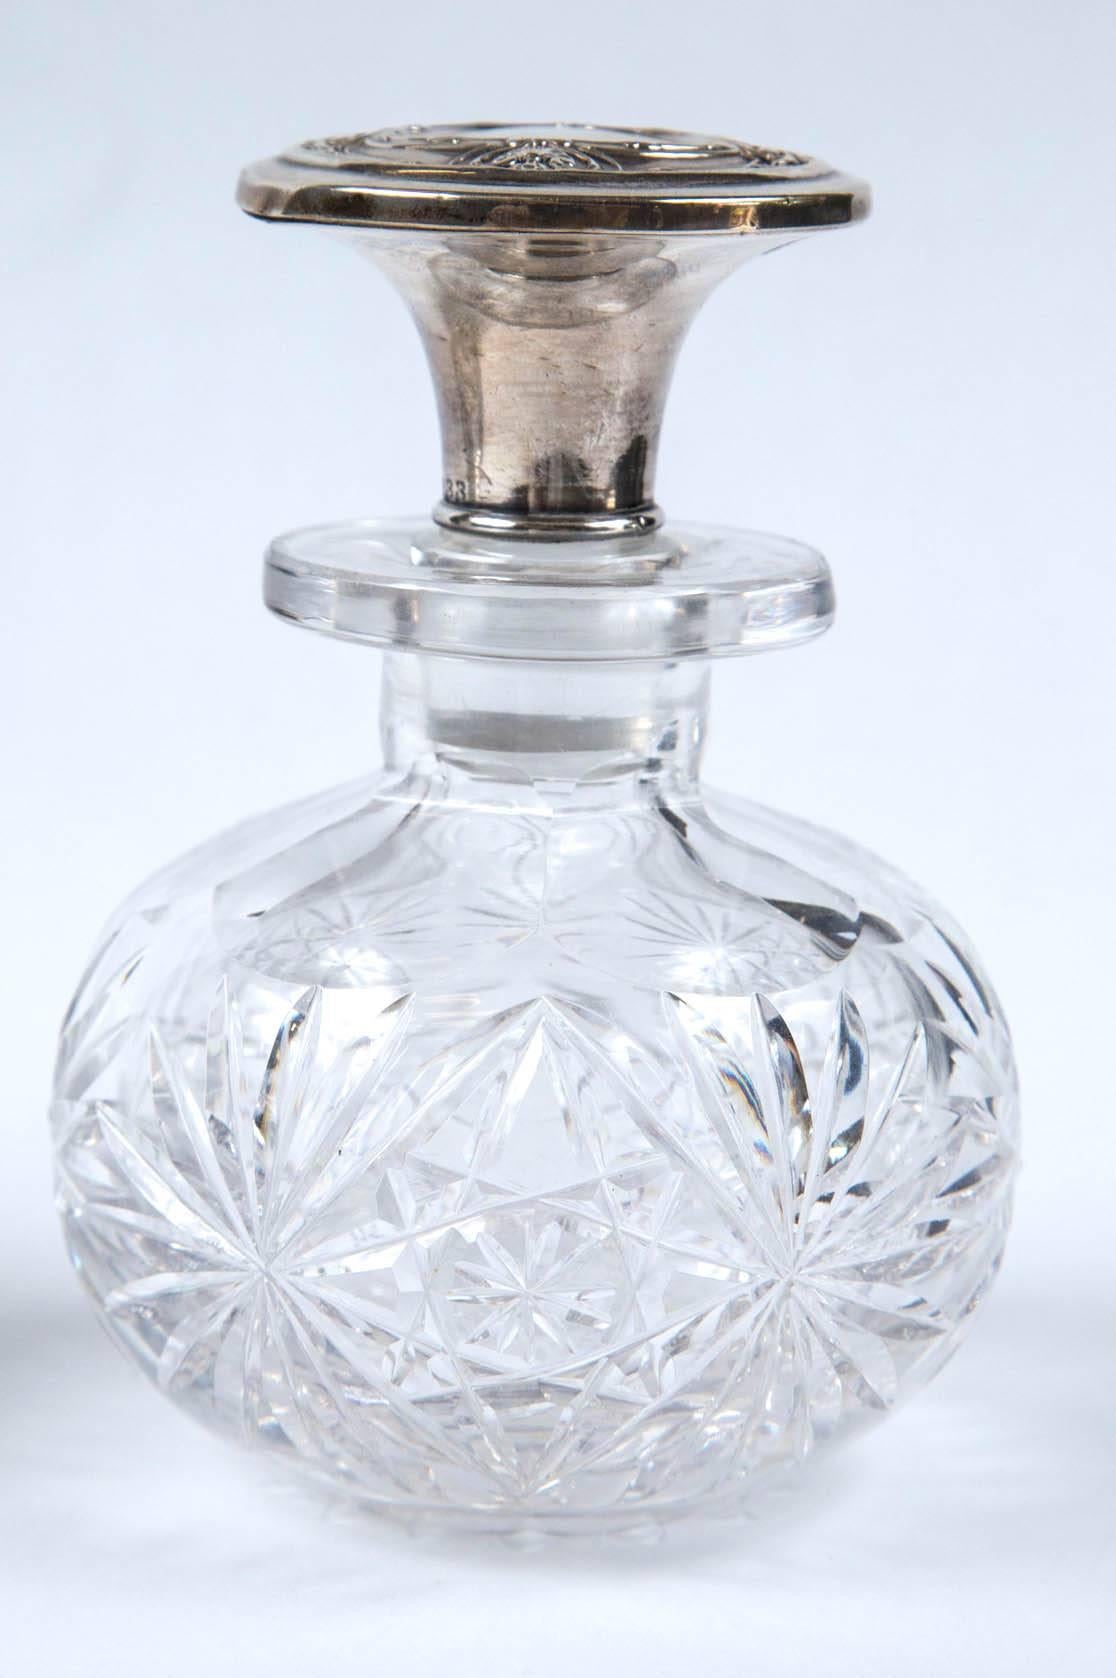 Pair of antique American 1890 sterling silver top perfume bottles, all cut crystal sunburst design in great condition, with matching sterling silver tops in good condition, with a beautiful matching design top for each bottle. S/N 833 matching on